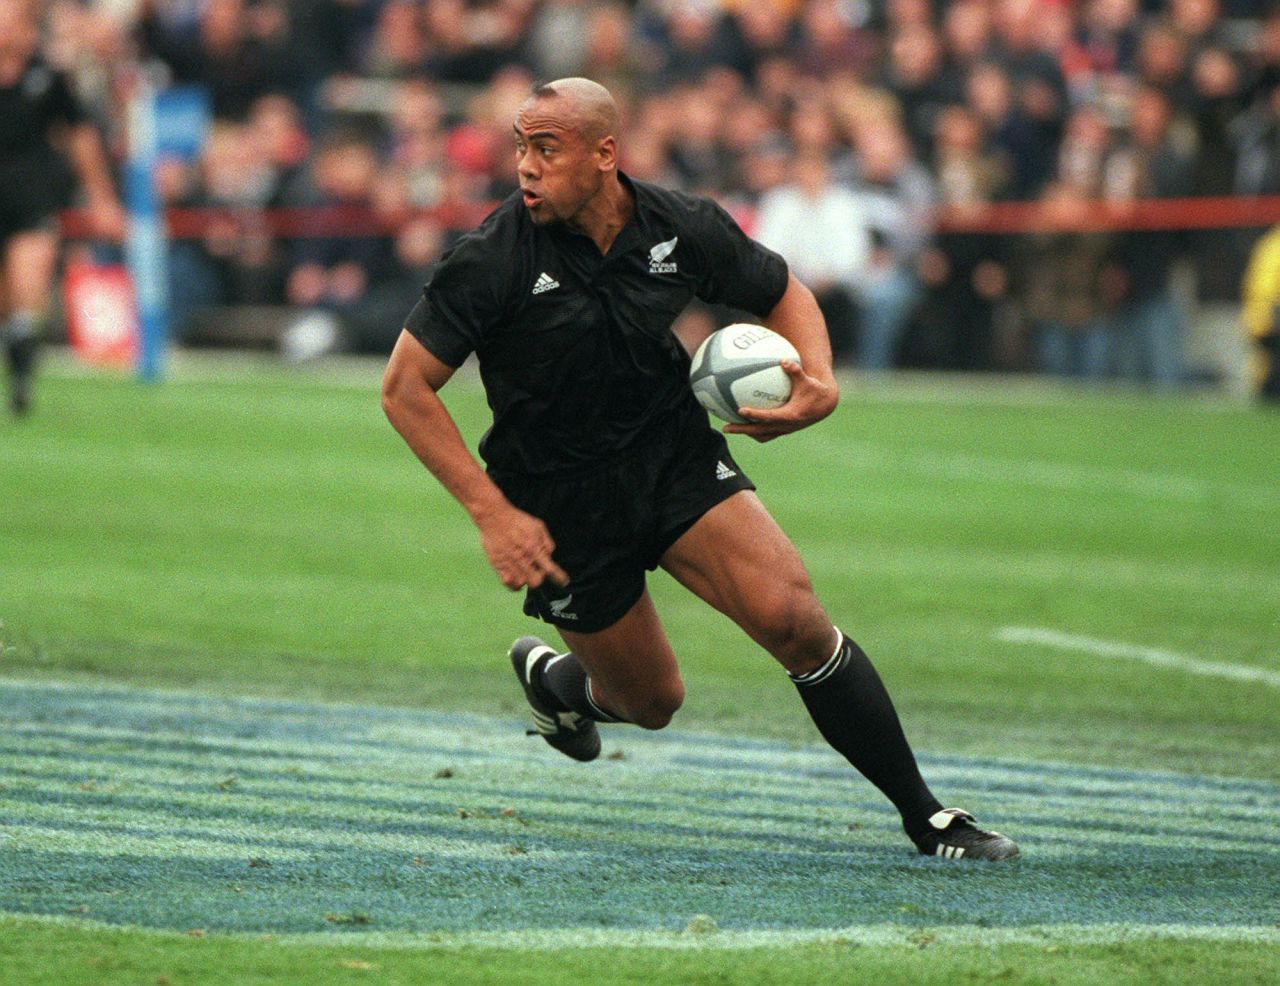 Thousands of people have gathered in the New Zealand capital of Auckland for a public memorial service to Jonah Lomu, one of the country's finest ever rugby players who died aged 40, earlier in November.